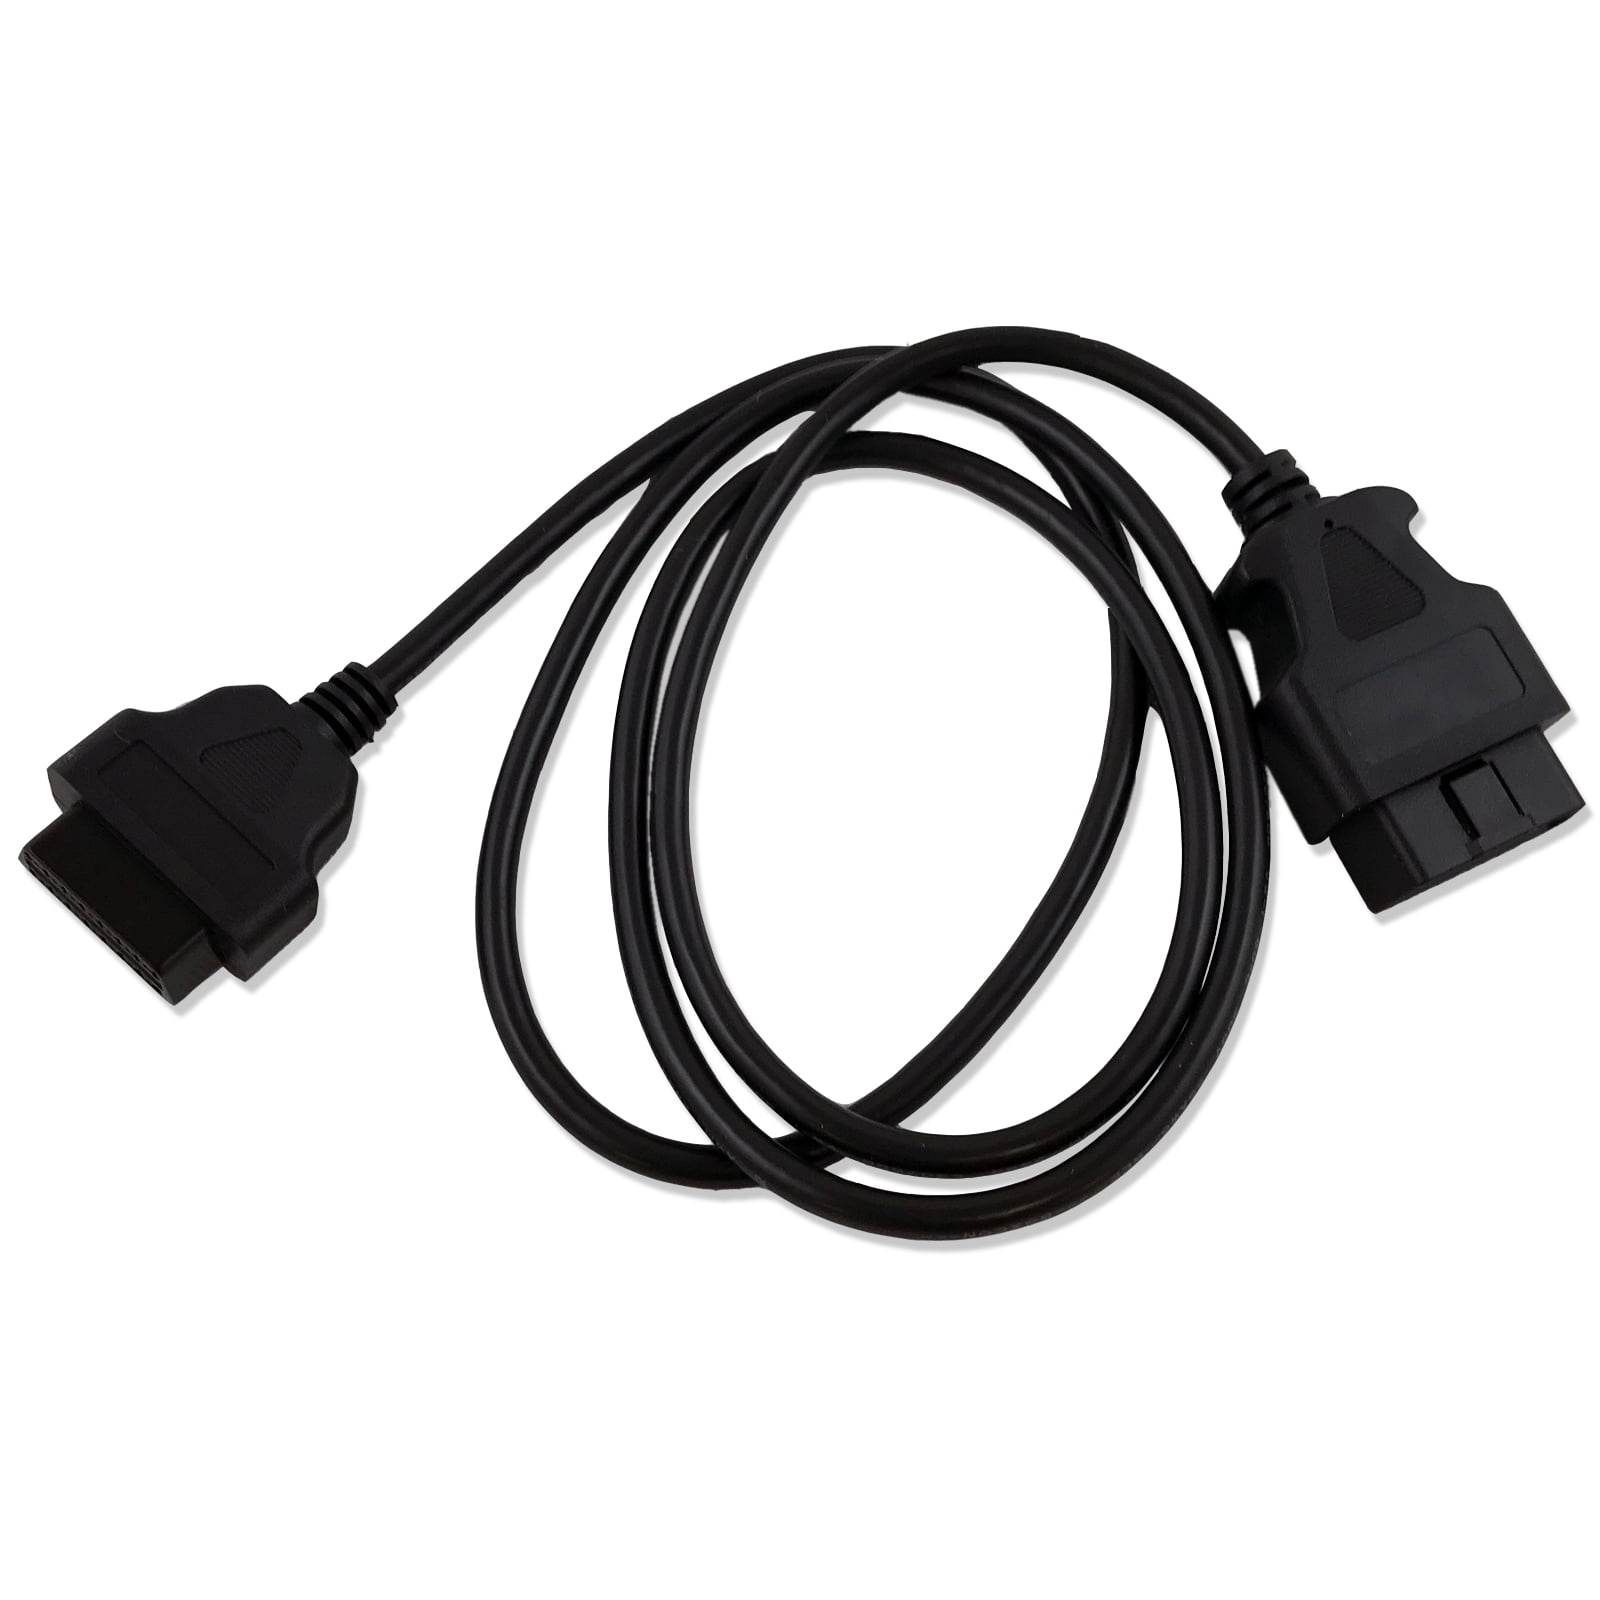 AUTOOL 1M 16PIN OBD2 OBDII Cable Connector OBDII 16pin Extension Cable OBD2 Extension Adapter Cable